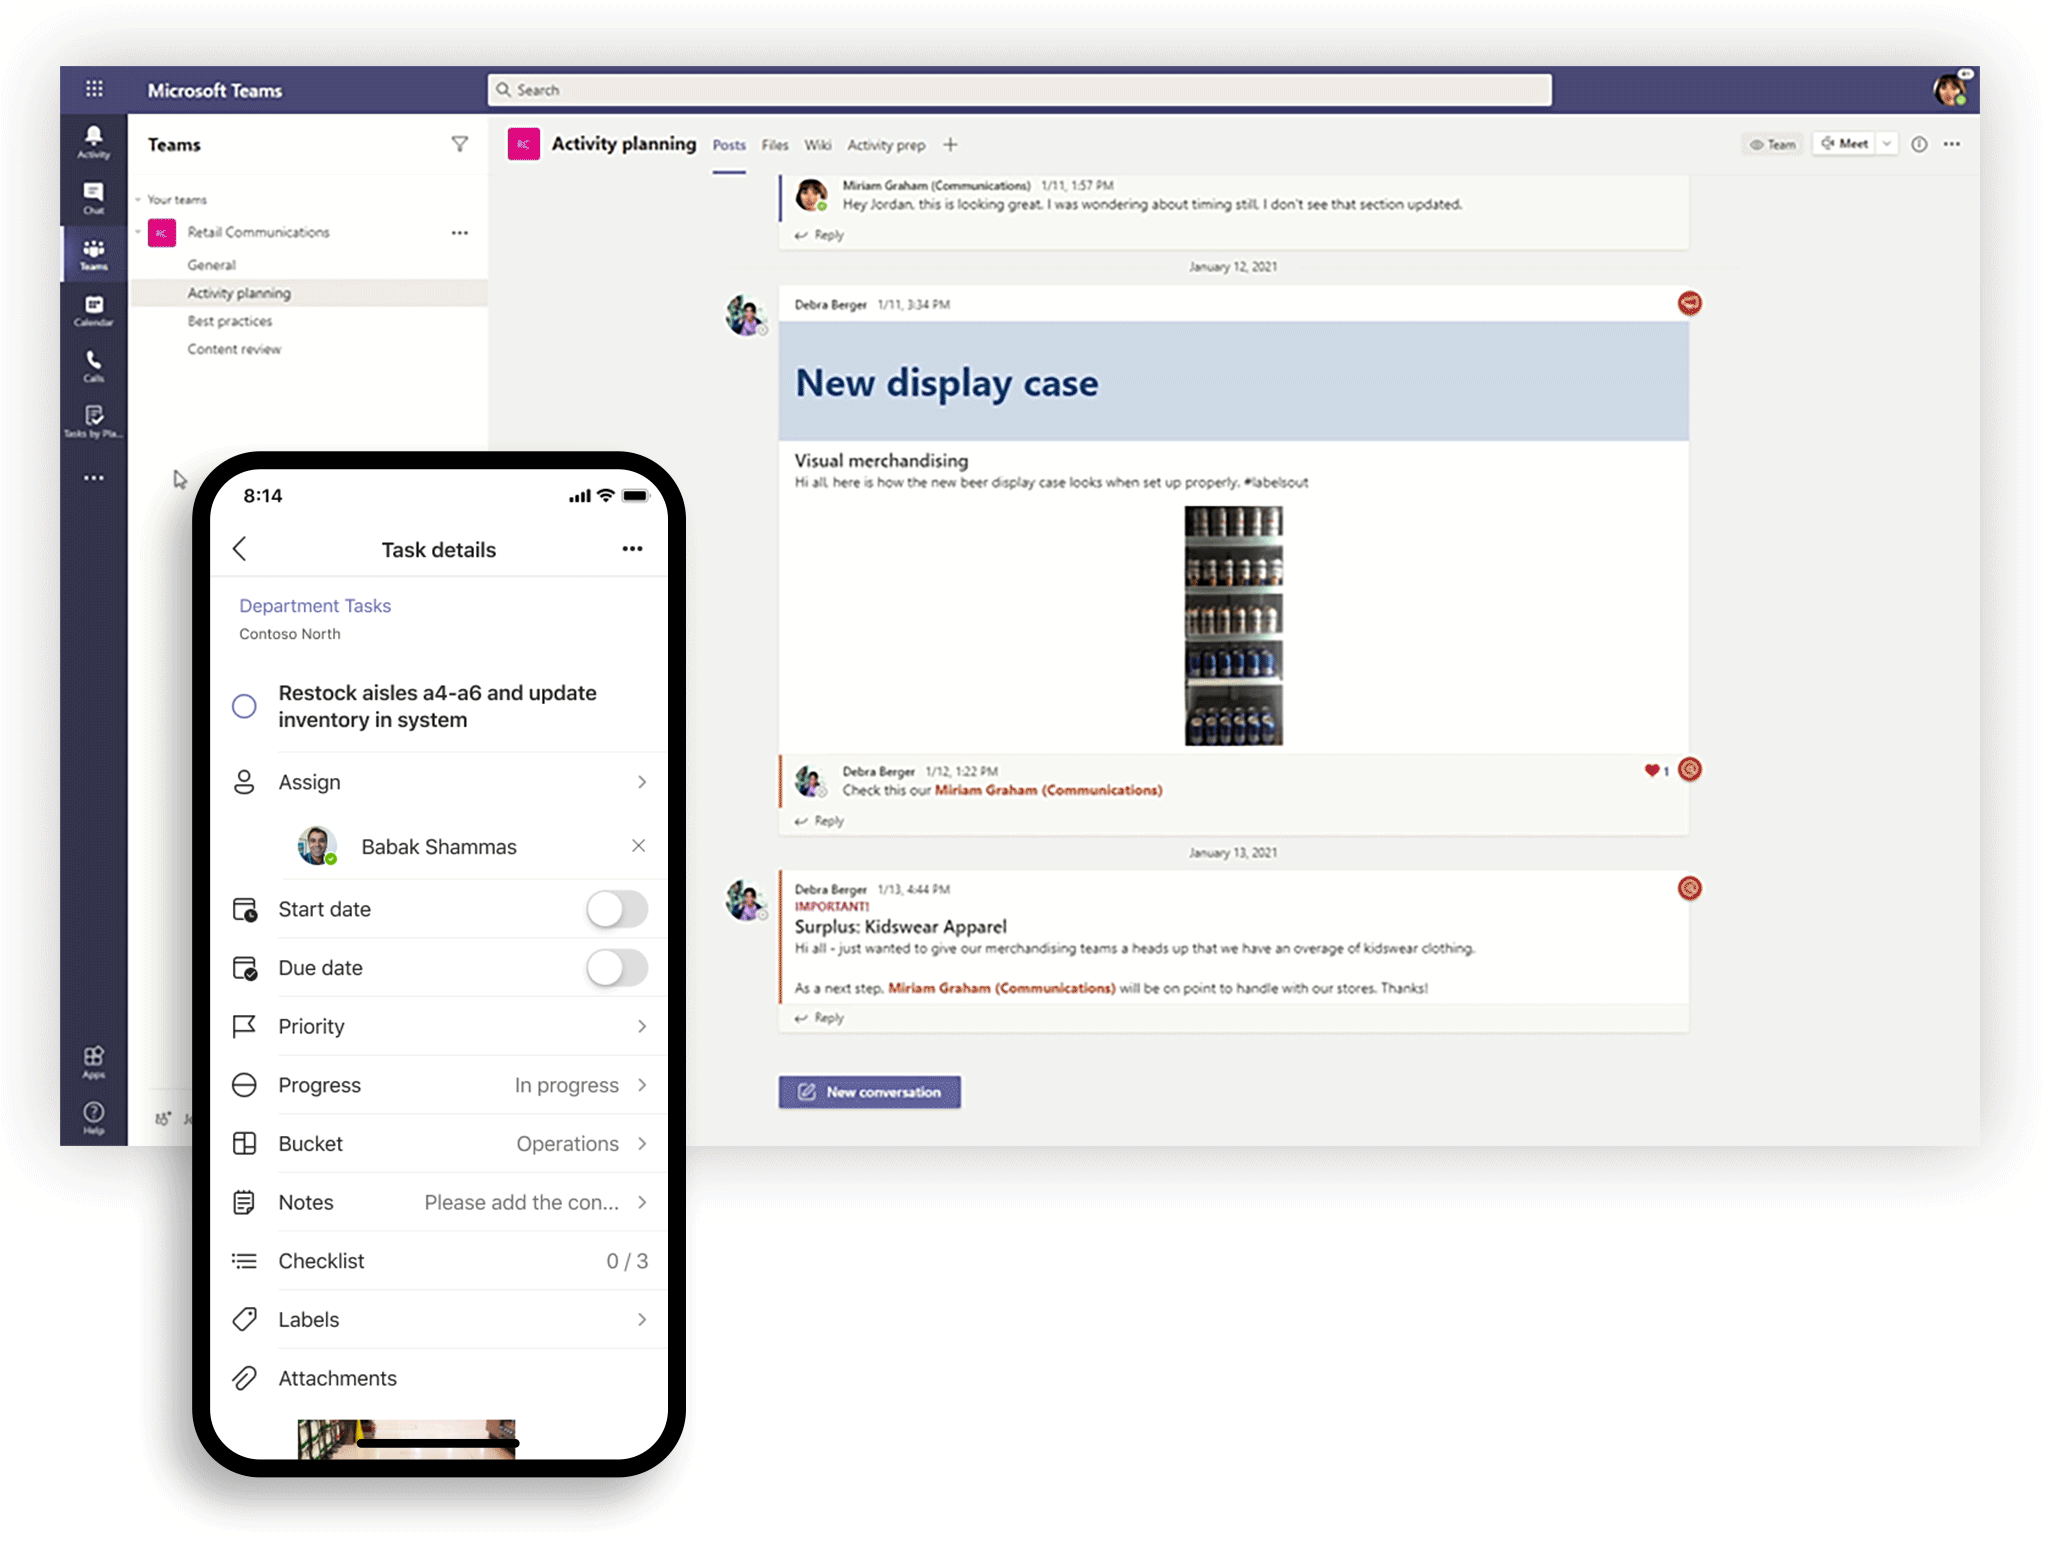 Animated GIF showcasing the new task publishing feature as a part of Microsoft Teams 